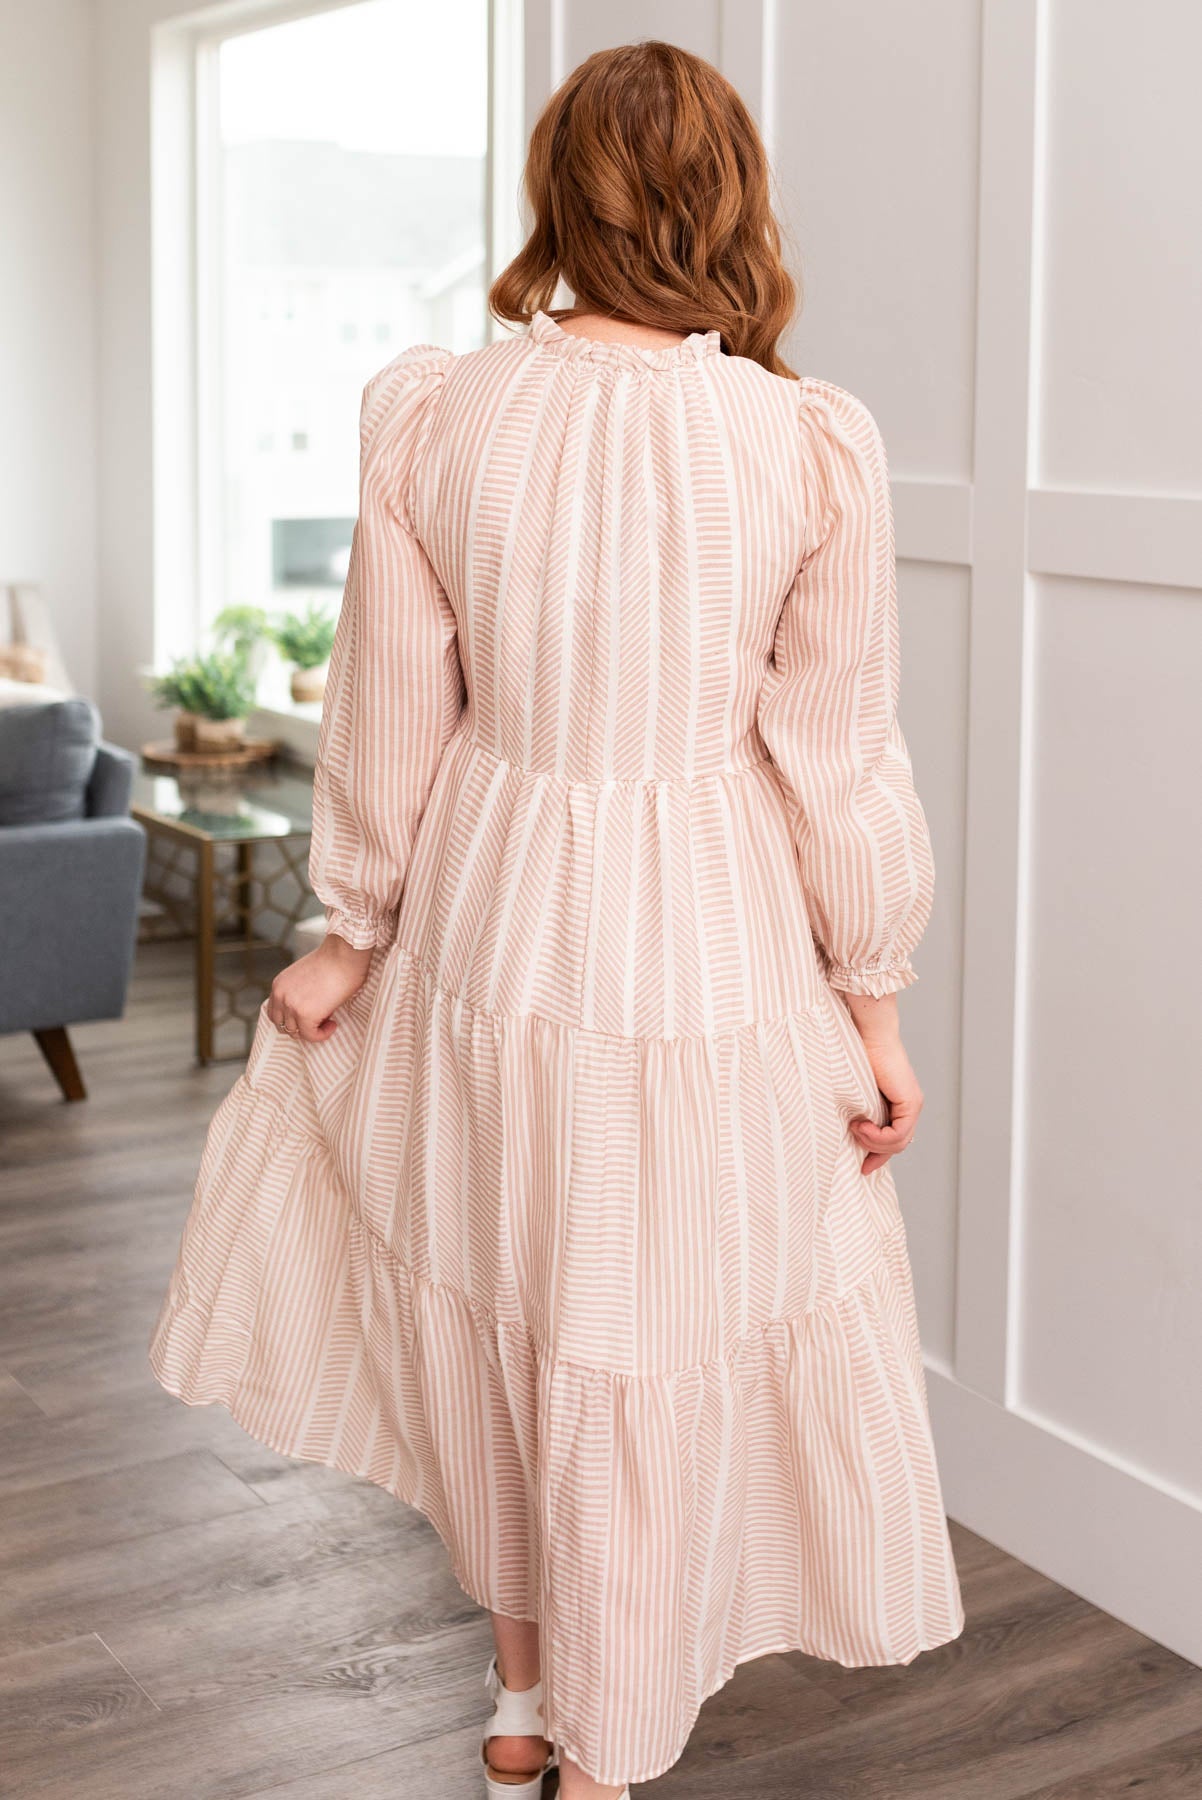 Back view of the tan patterned dress